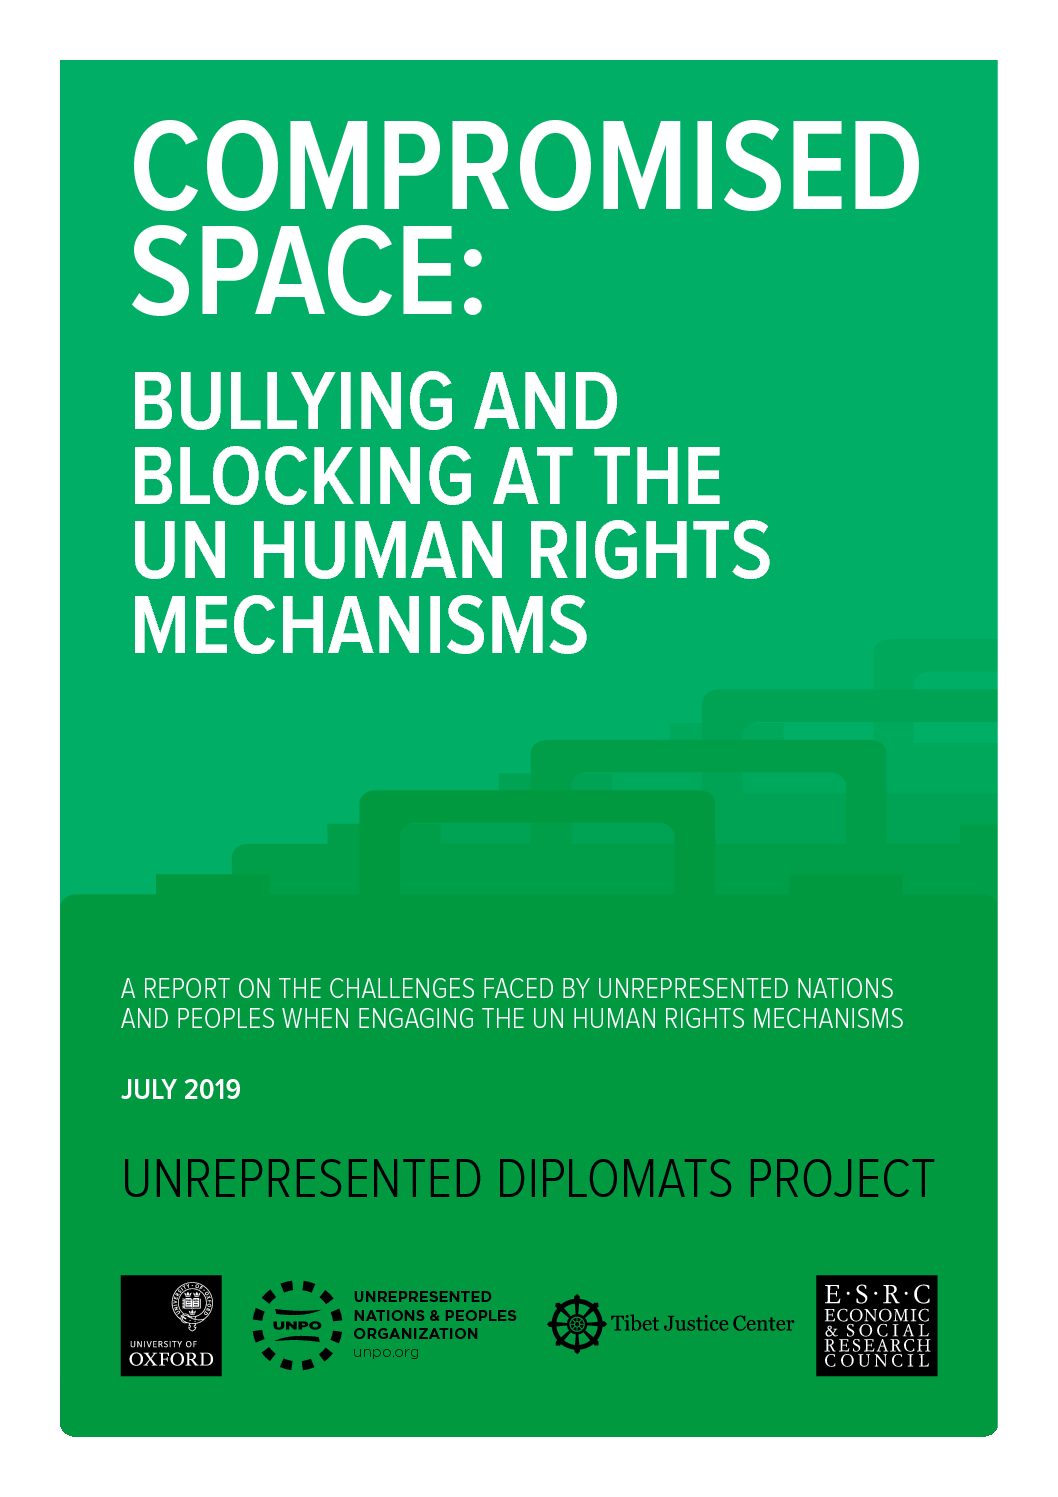 Read our new report – Compromised Space for Unrepresented Peoples at the United Nations